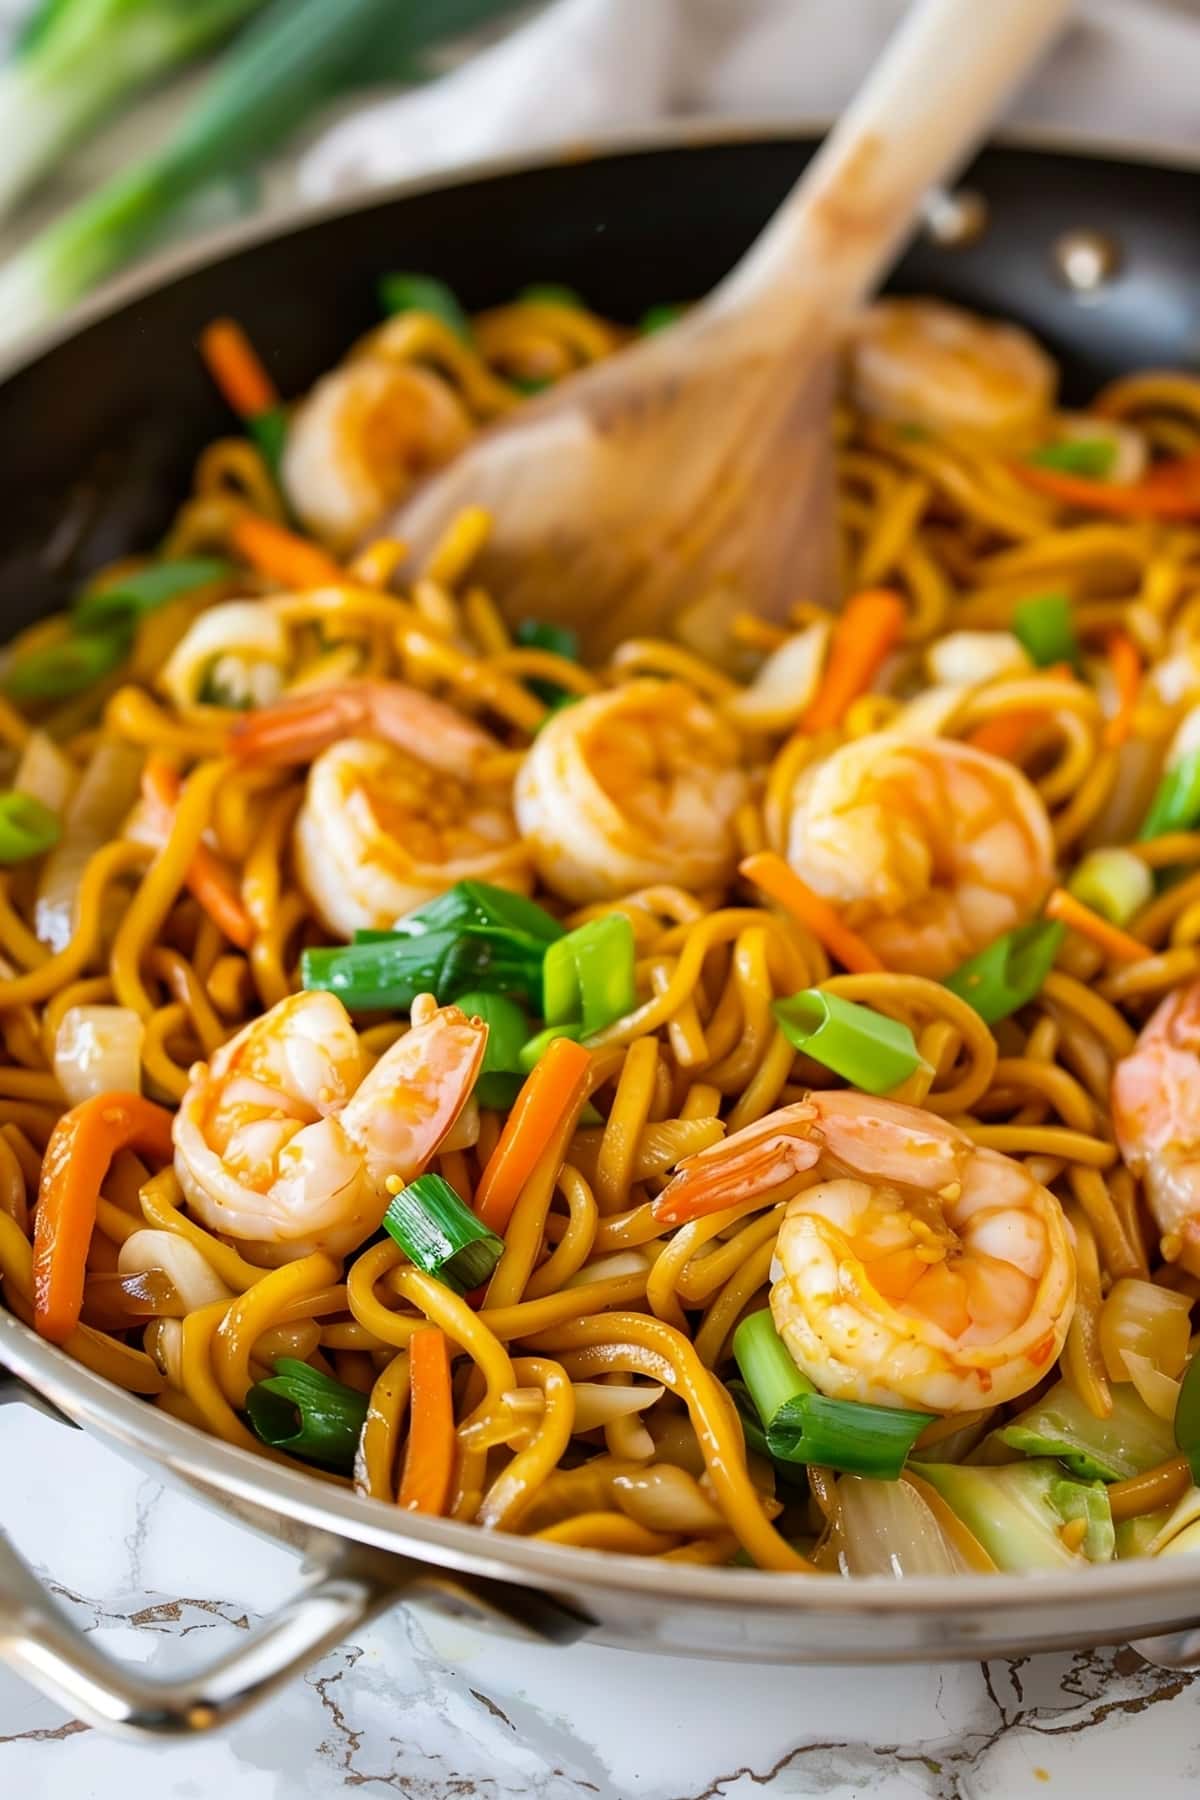 A pan filled with lo mein noodles and shrimp, ready to be served